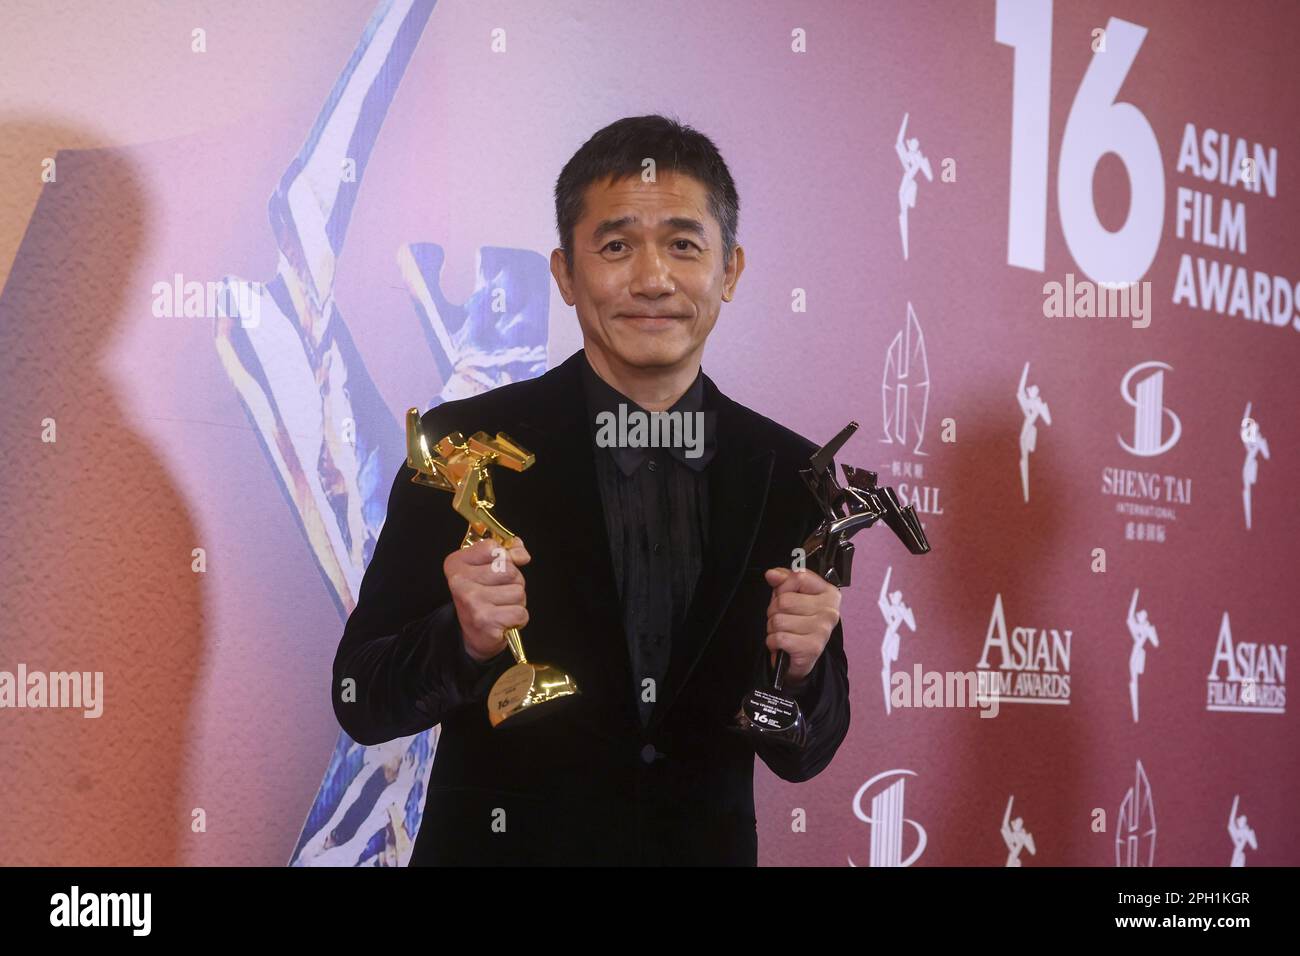 Tony Leung Chiu-wai poses with his award after winning the Best Actor with 'Where the Wind Blows', at the 16th Asian Film Awards at Hong Kong Palace Museum, in Hong Kong 12MAR23. SCMP/ Dickson Lee Stock Photo